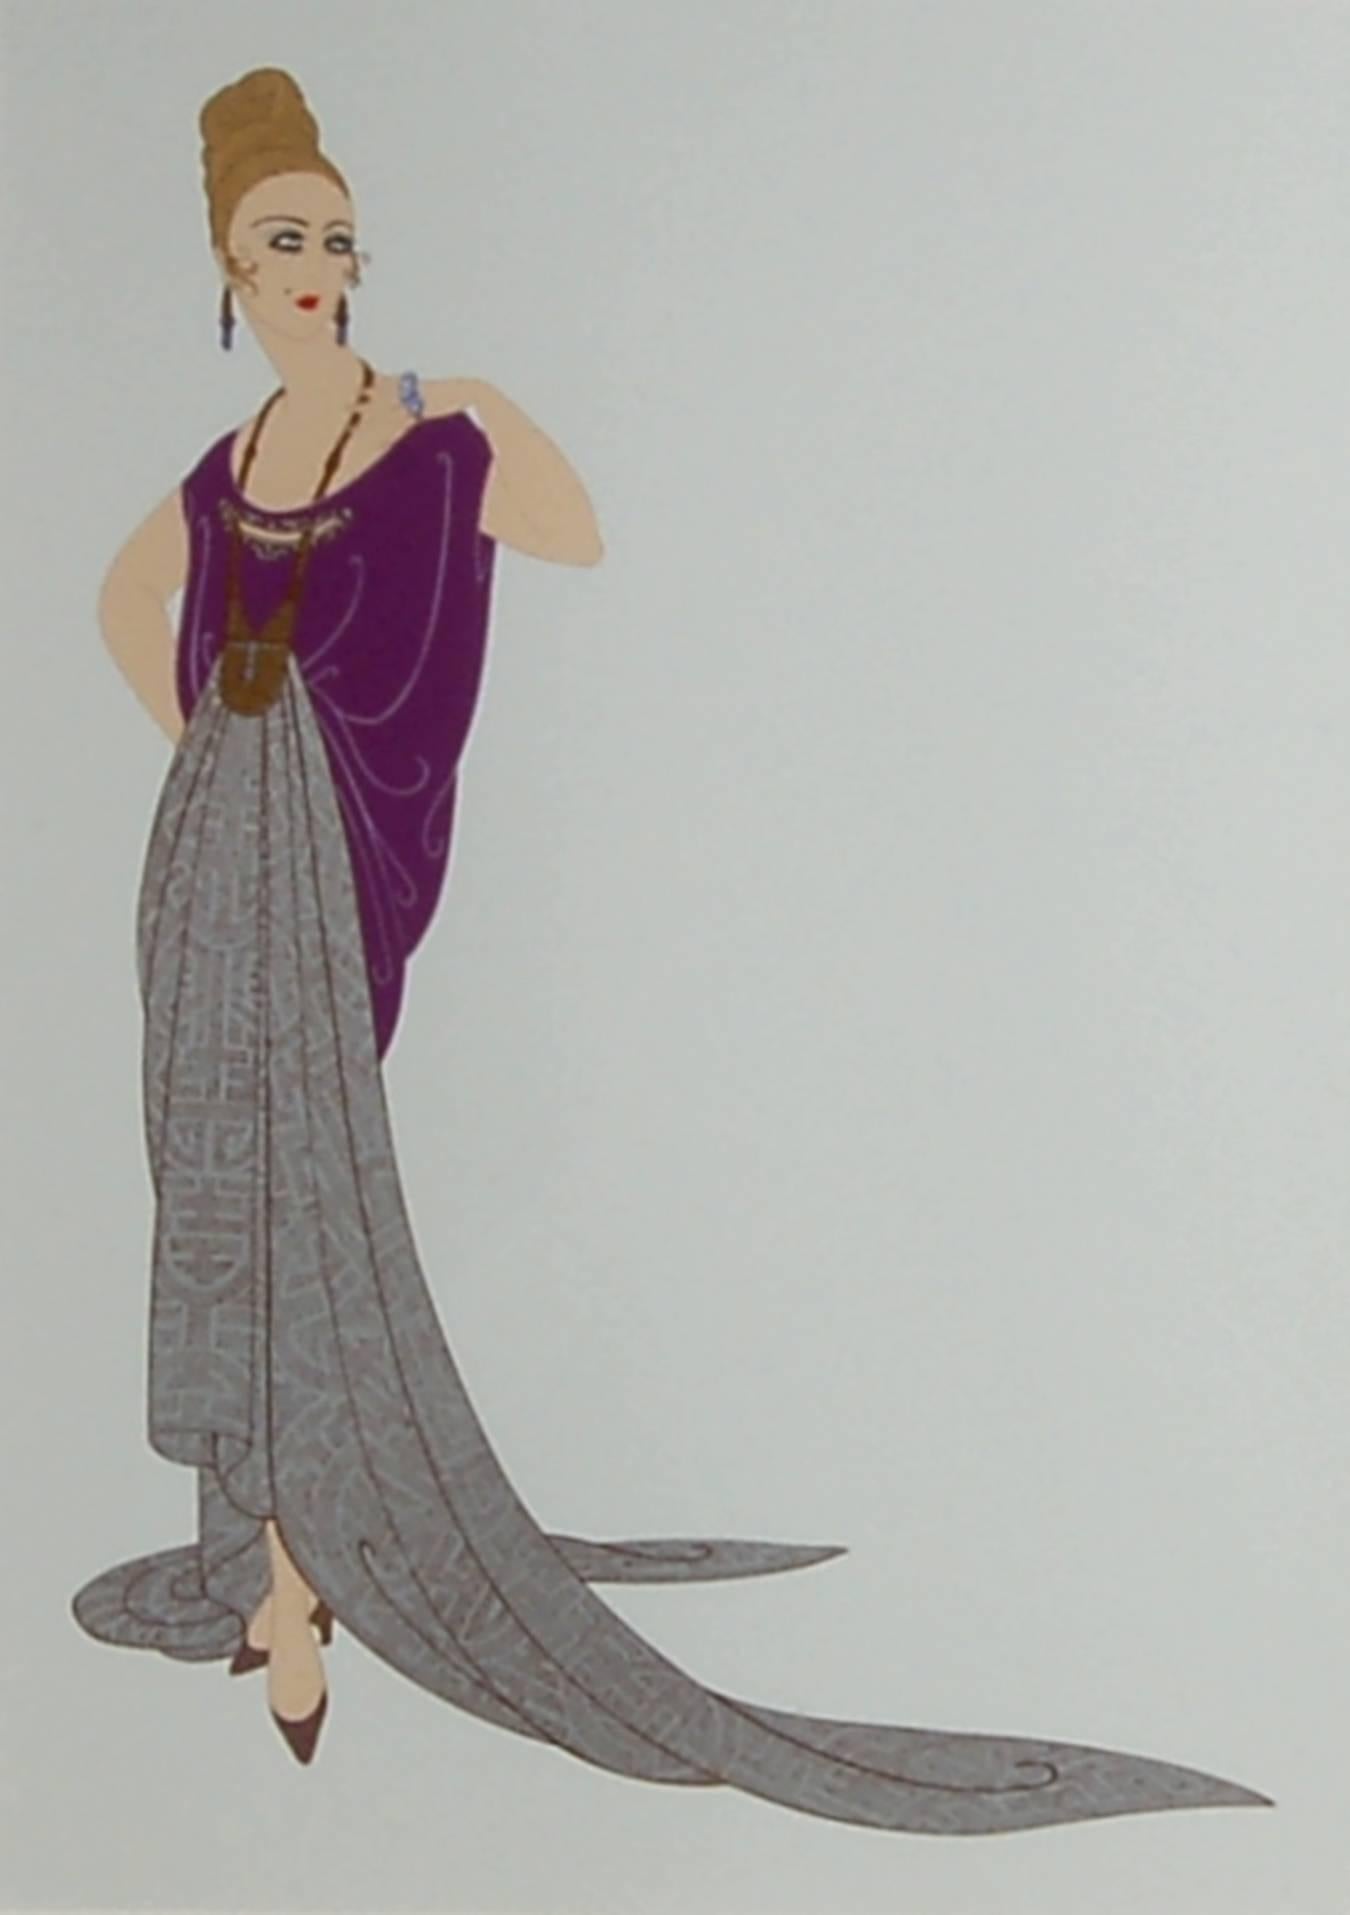 At the Ball - Print by Erté